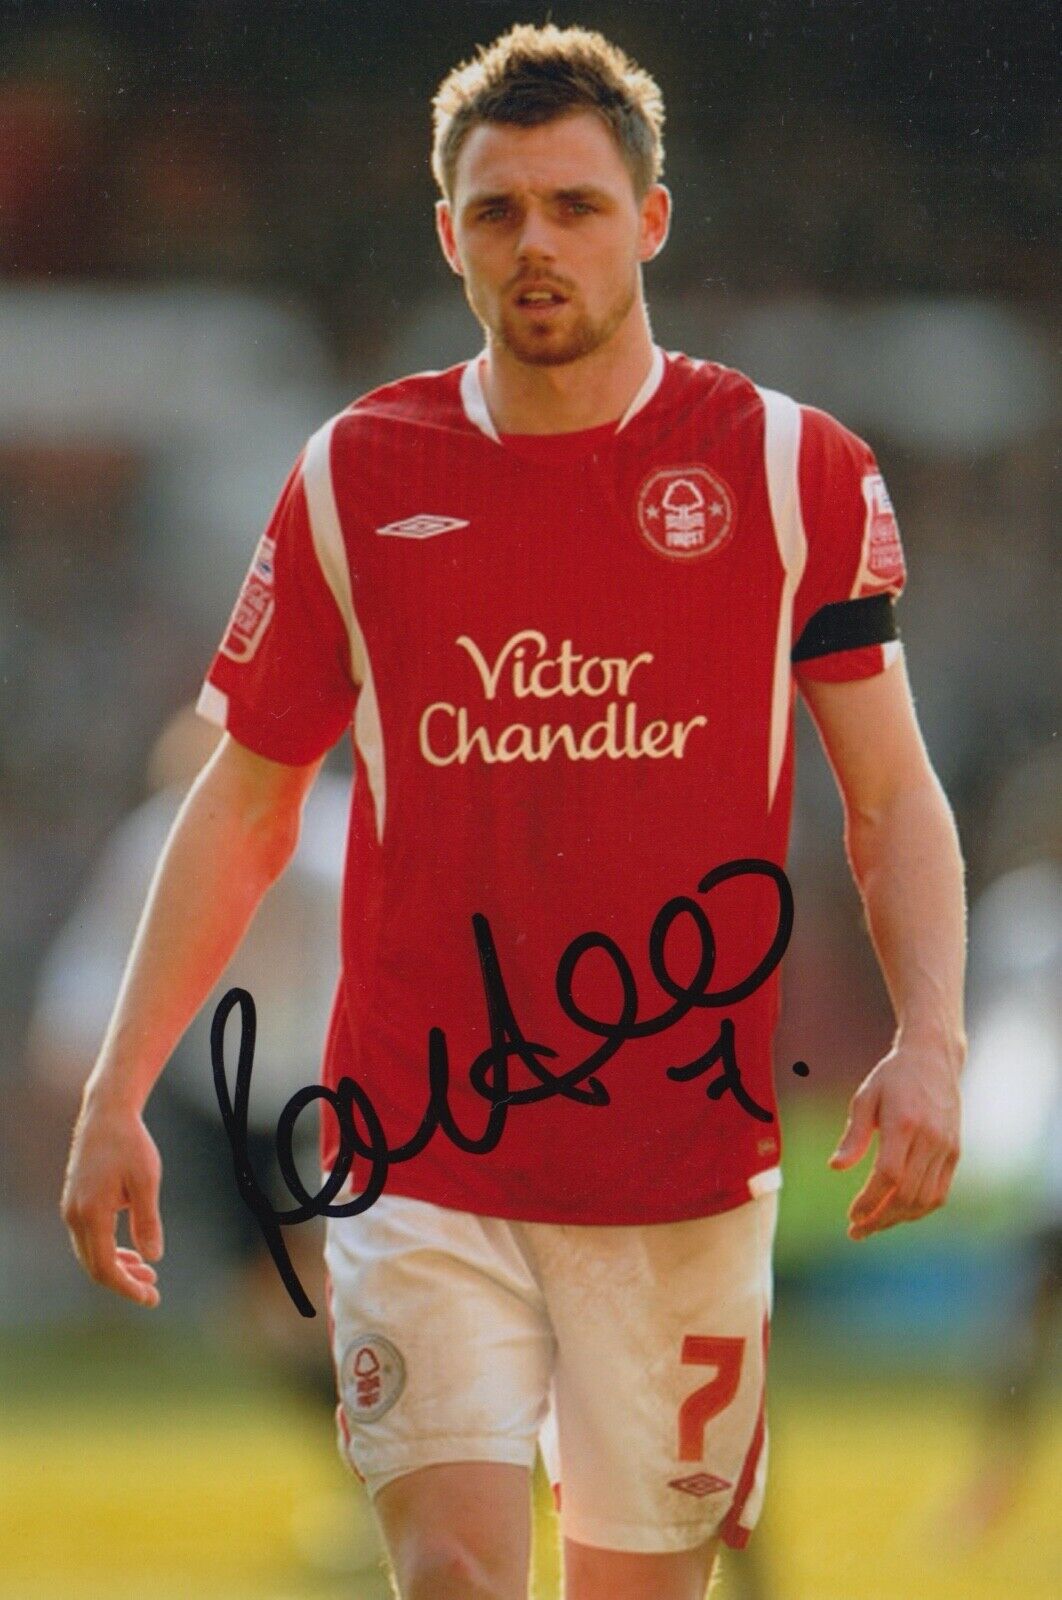 PAUL ANDERSON HAND SIGNED 6X4 Photo Poster painting - FOOTBALL AUTOGRAPH - NOTTINGHAM FOREST 6.